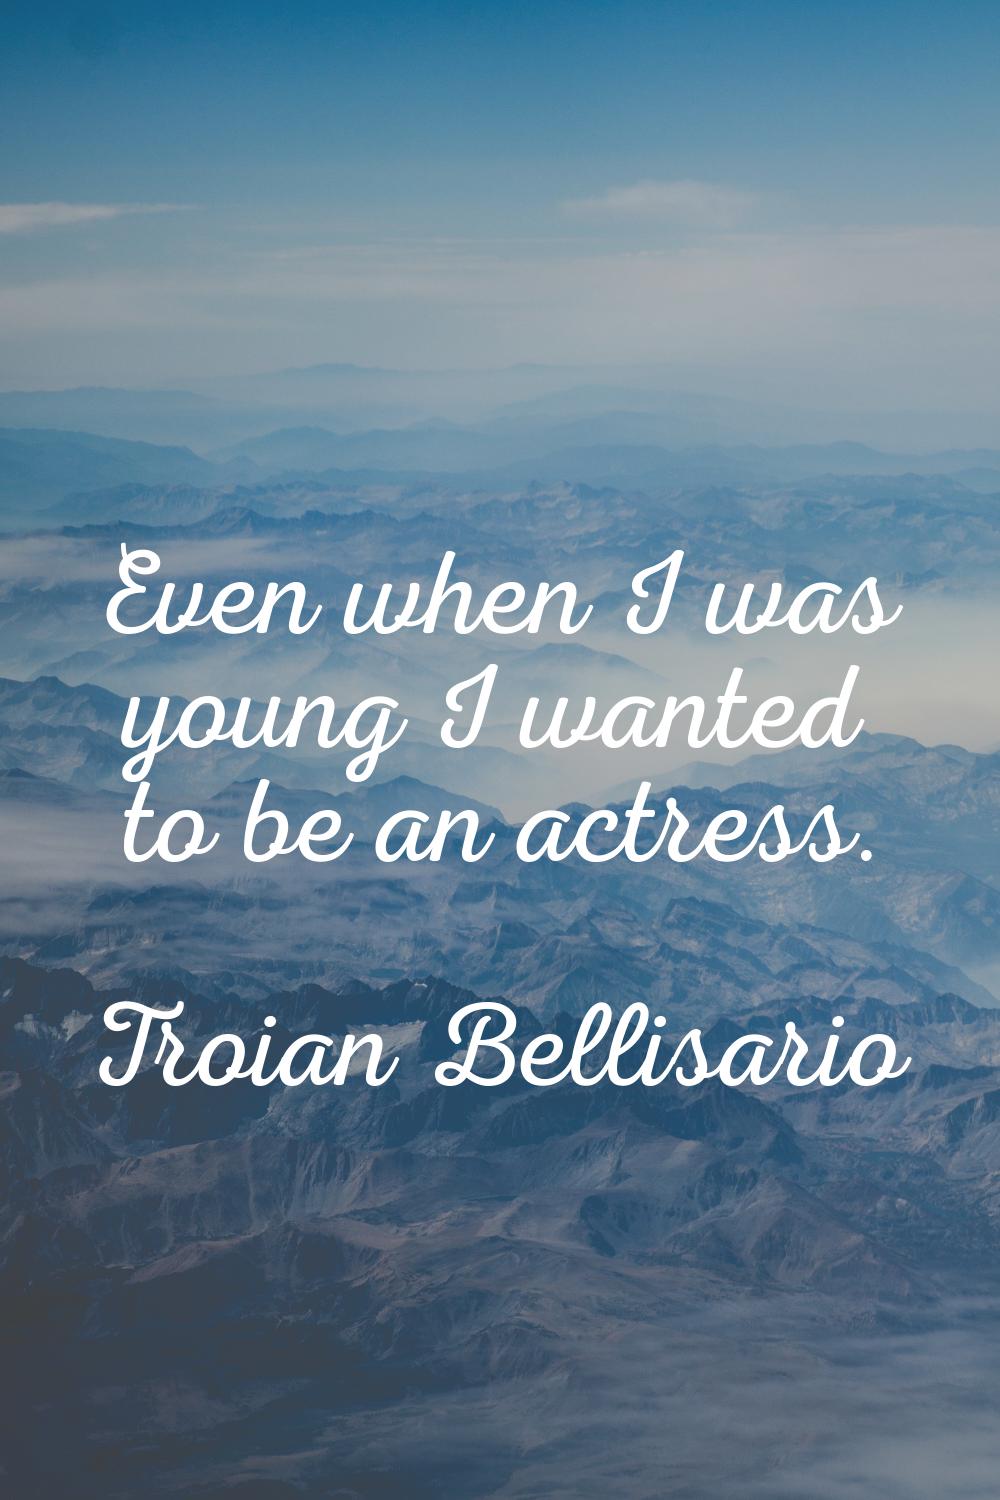 Even when I was young I wanted to be an actress.